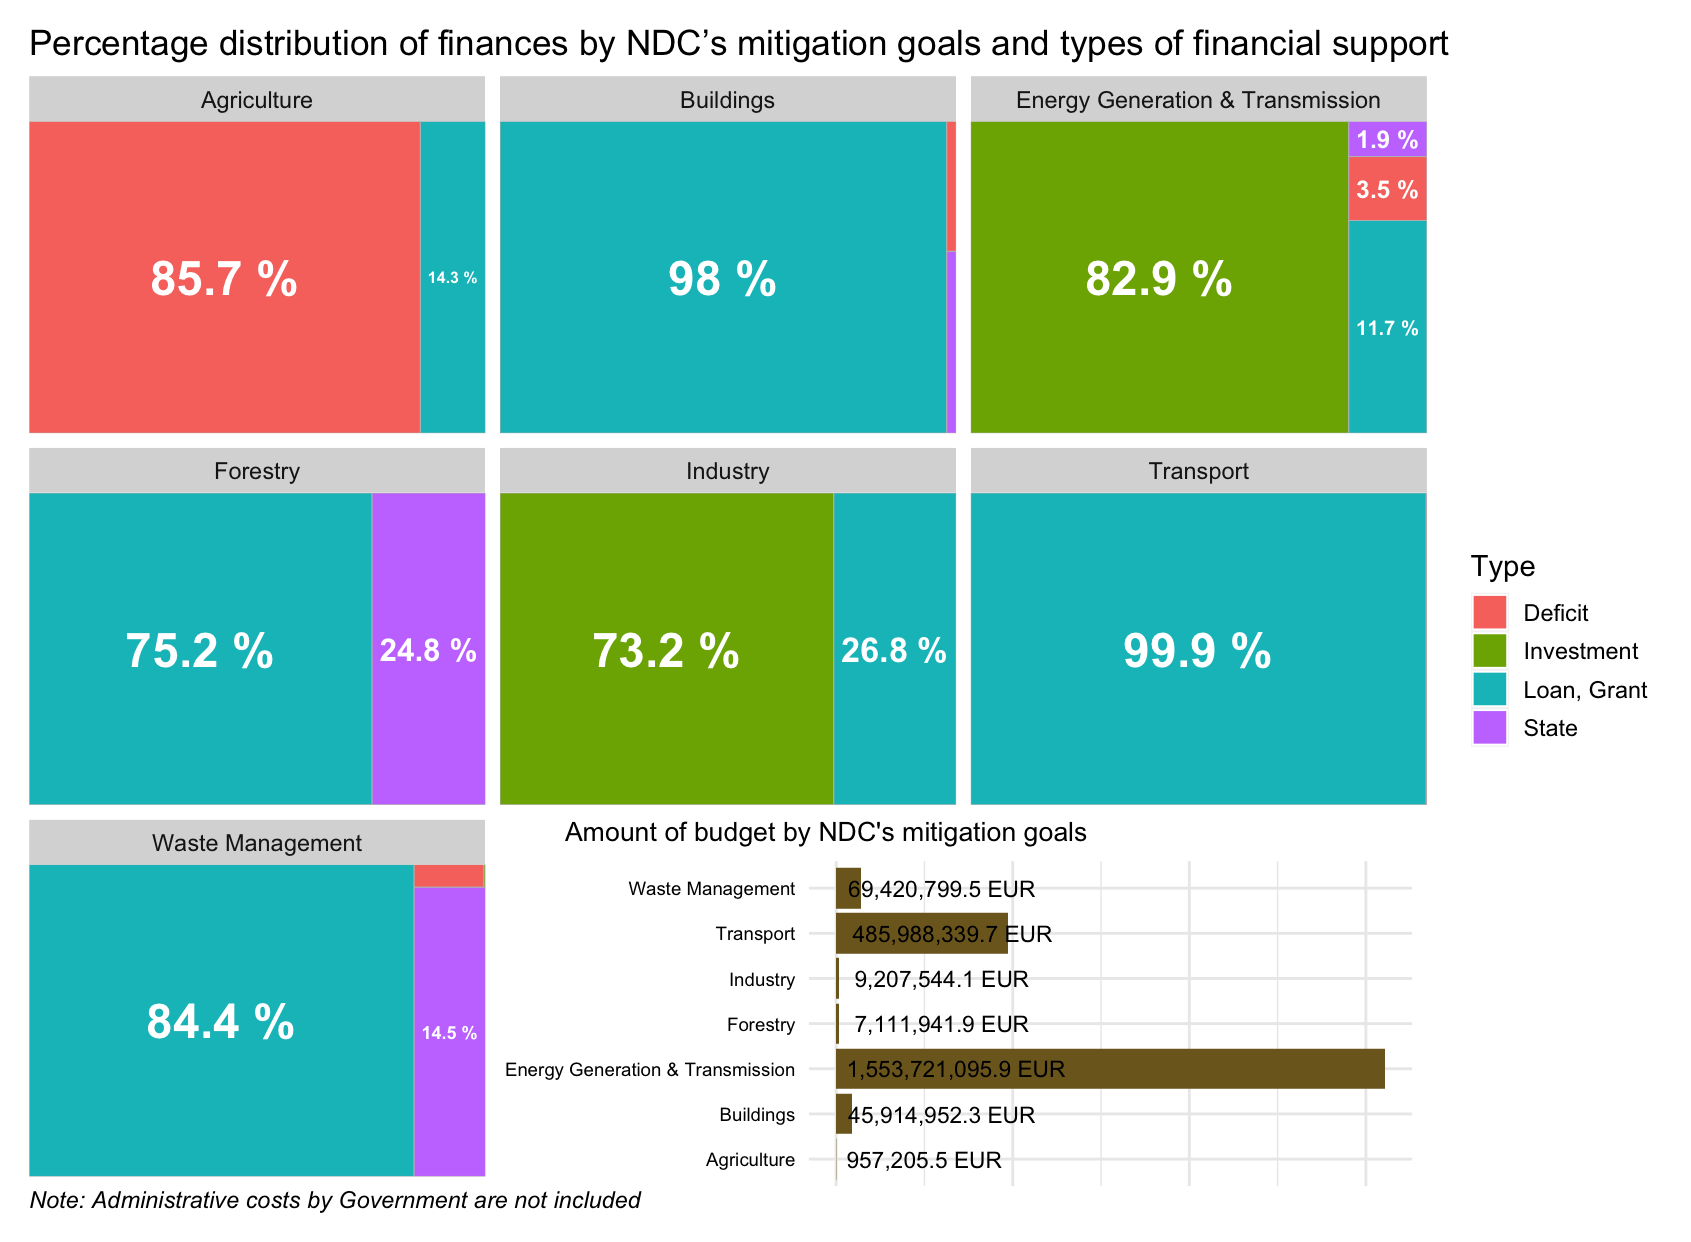 Percentage distribution of finances by NDC’s mitigation goals and types of financial support